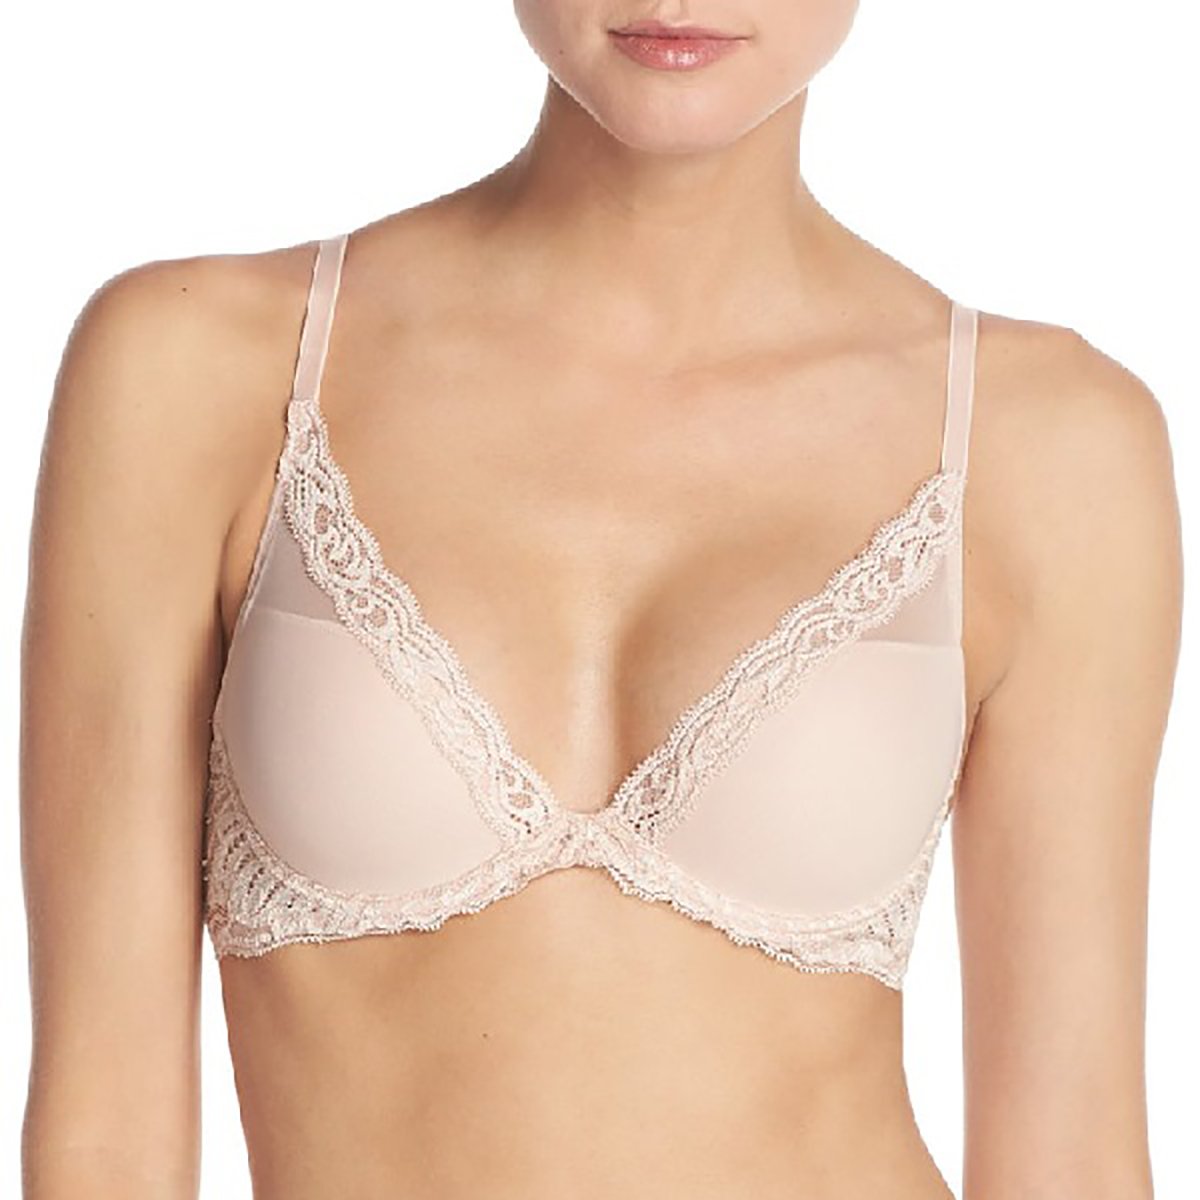 NATORI 34B PINK SILK SATIN BRA WITH WHITE LACE TRIM ON CUPS, STRAPS, FULL  WINGS